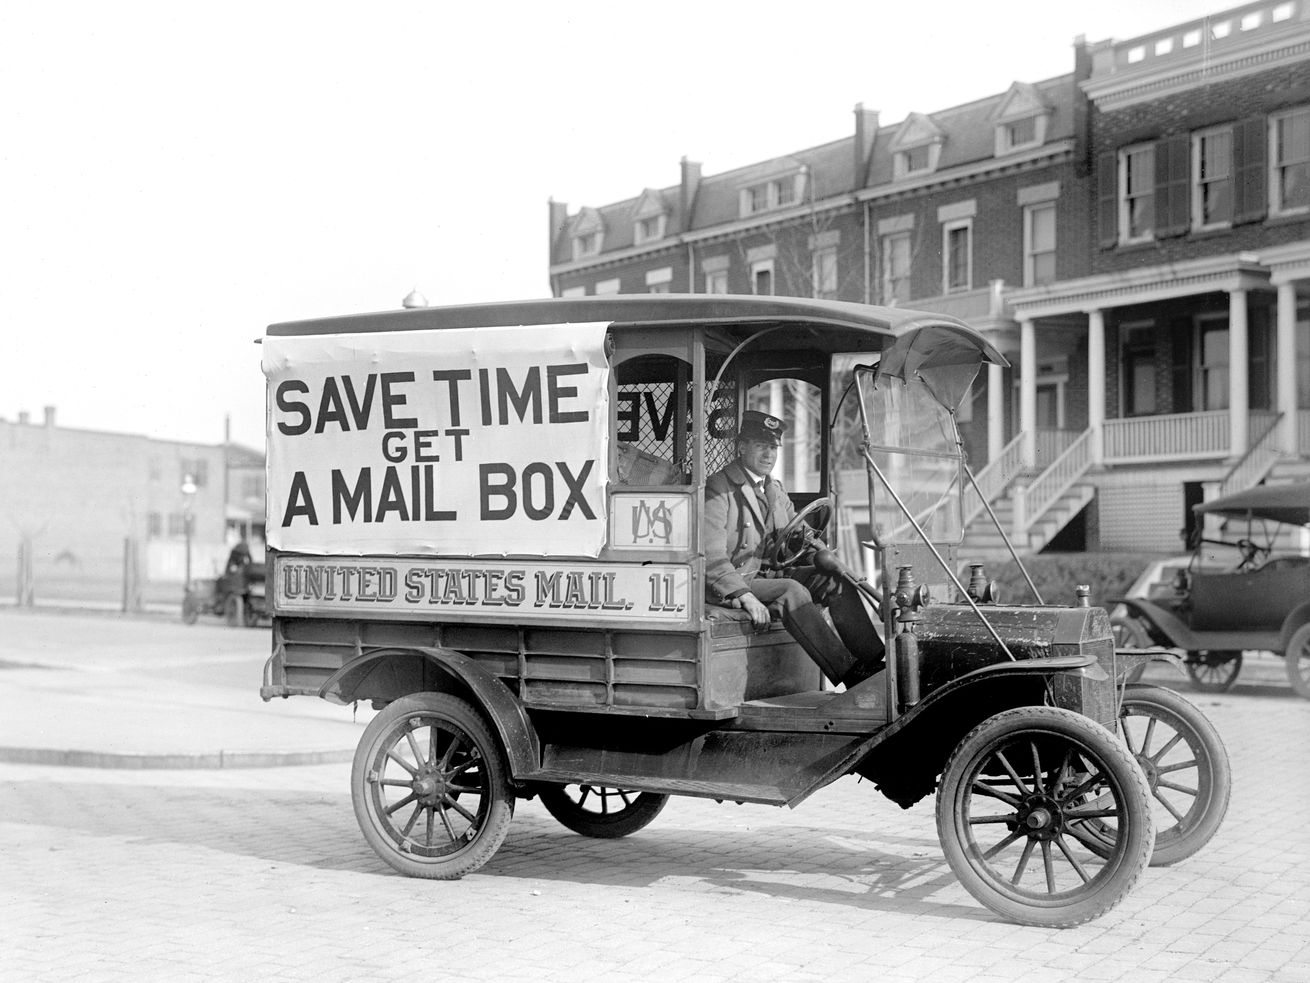 A car resembling a Model T Ford carries a sign on its side that reads, “Save time, get a mail box. United States mail.